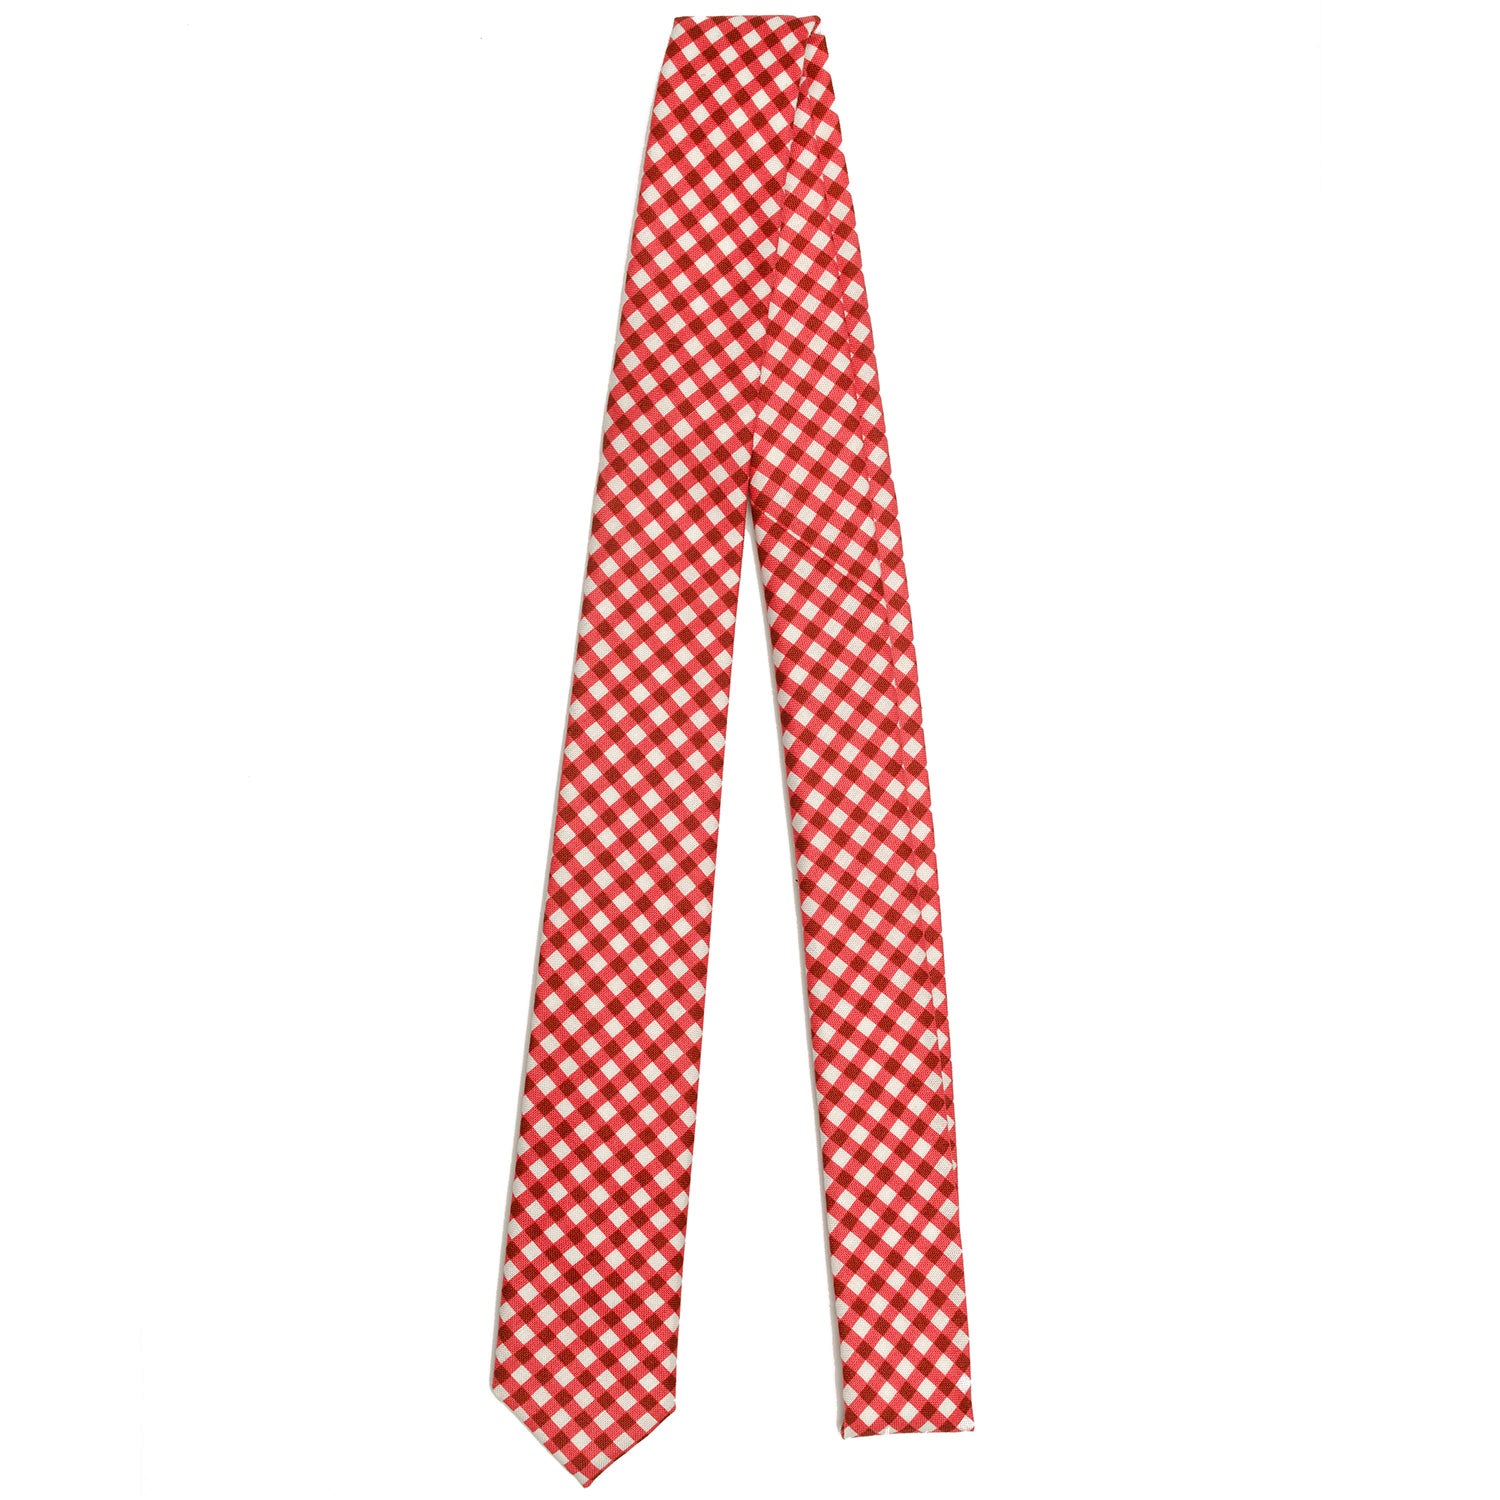 Liberty of London Red Gingham Skinny Tie